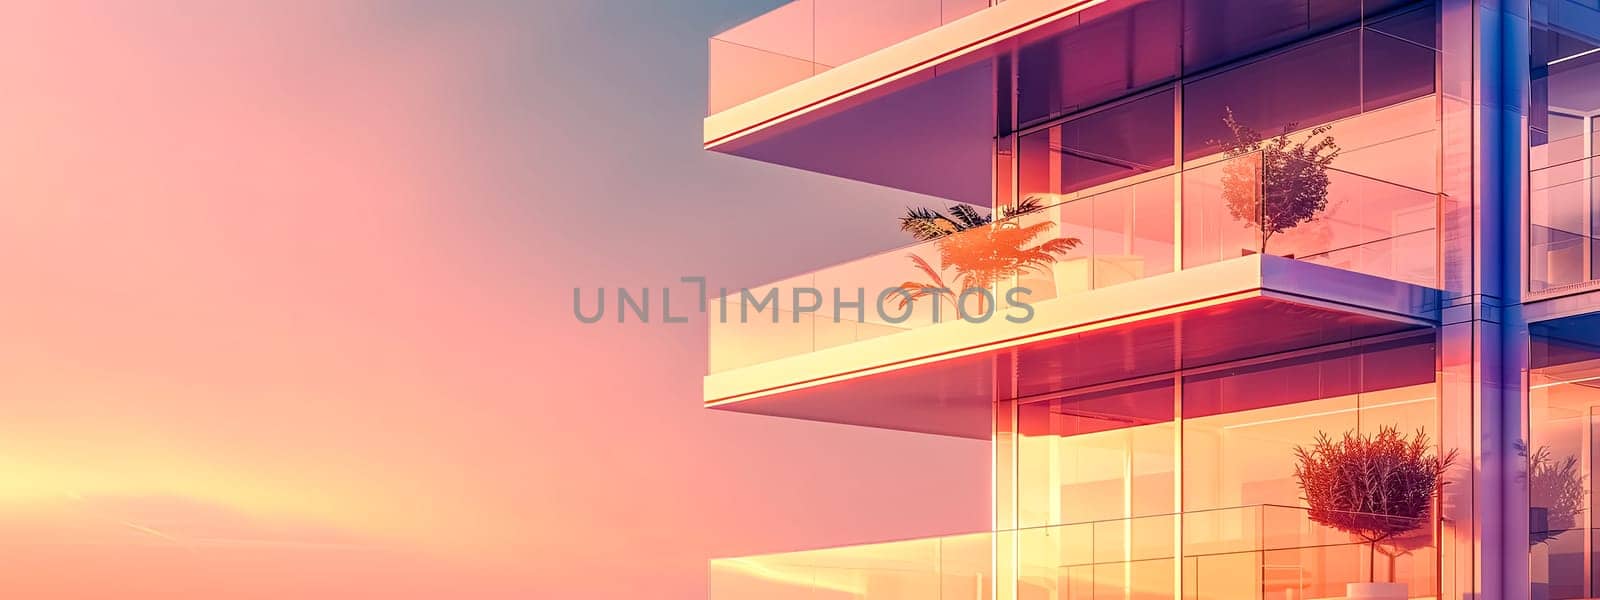 Modern architecture at sunset with vibrant colors, copy space by Edophoto